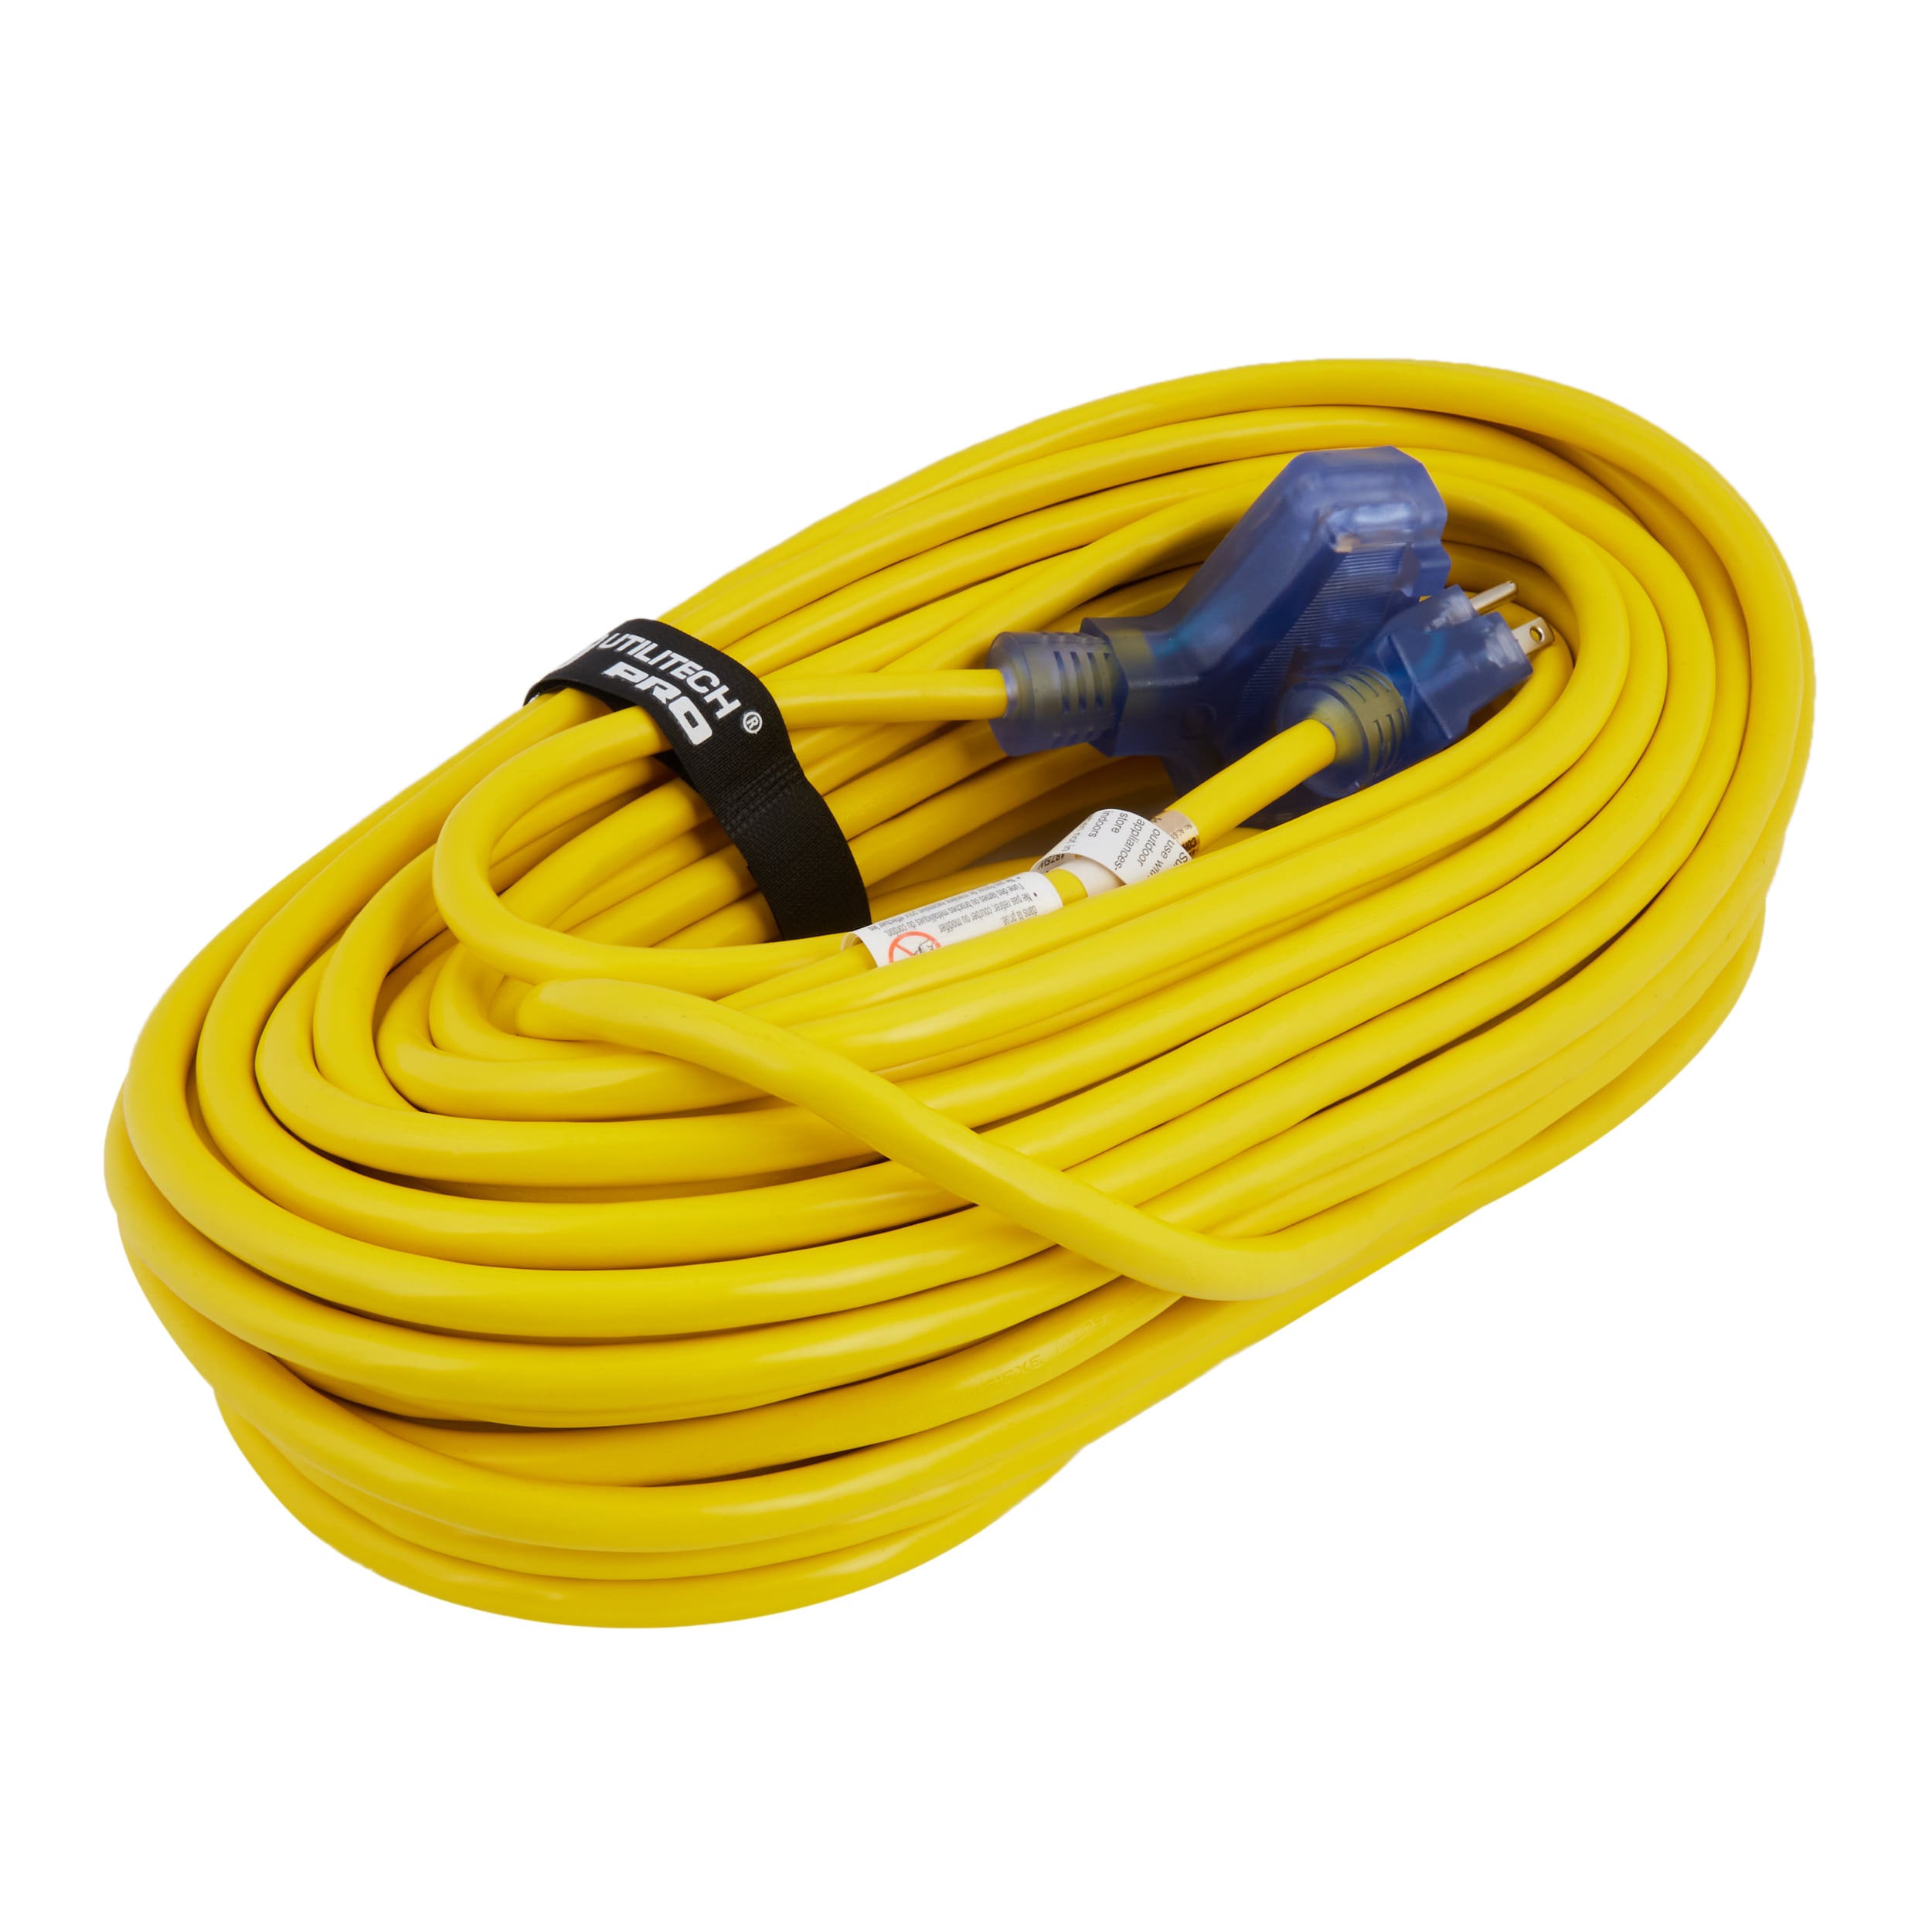 100' 12 Gauge Yellow Heavy Duty Cord with Lighted Triple Outlet MADE IN USA 